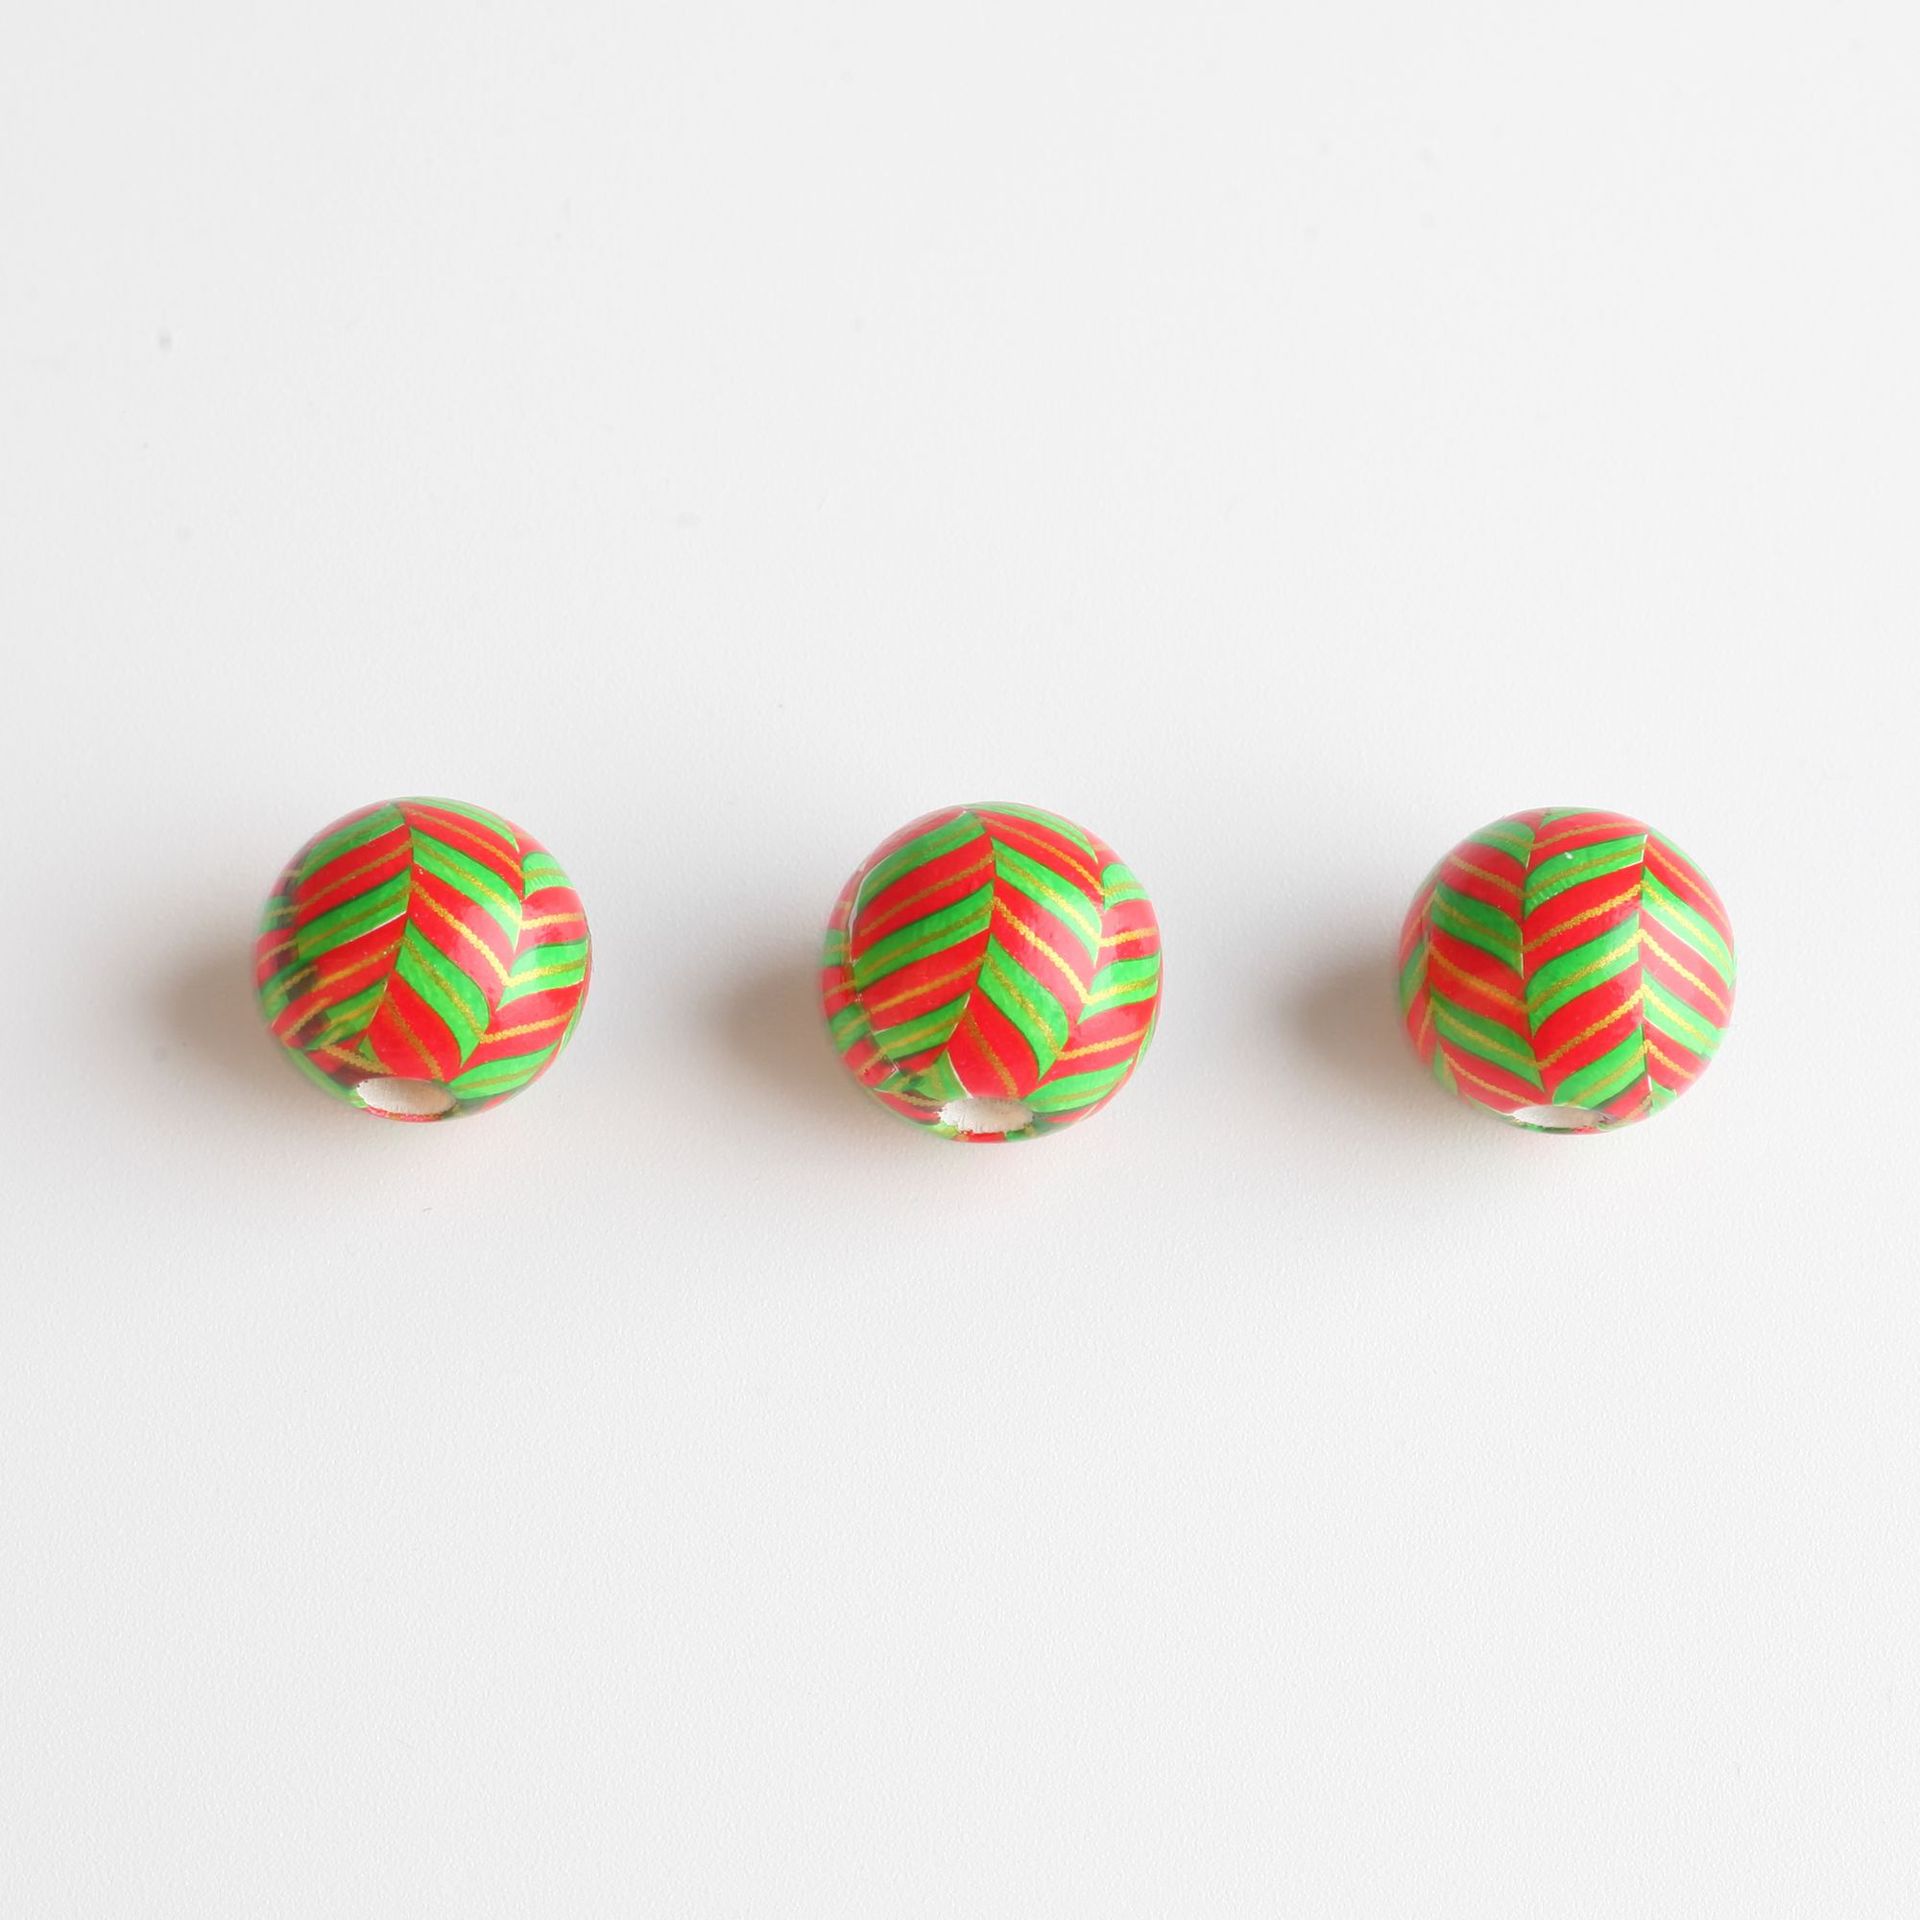 4:16mm red and green pattern